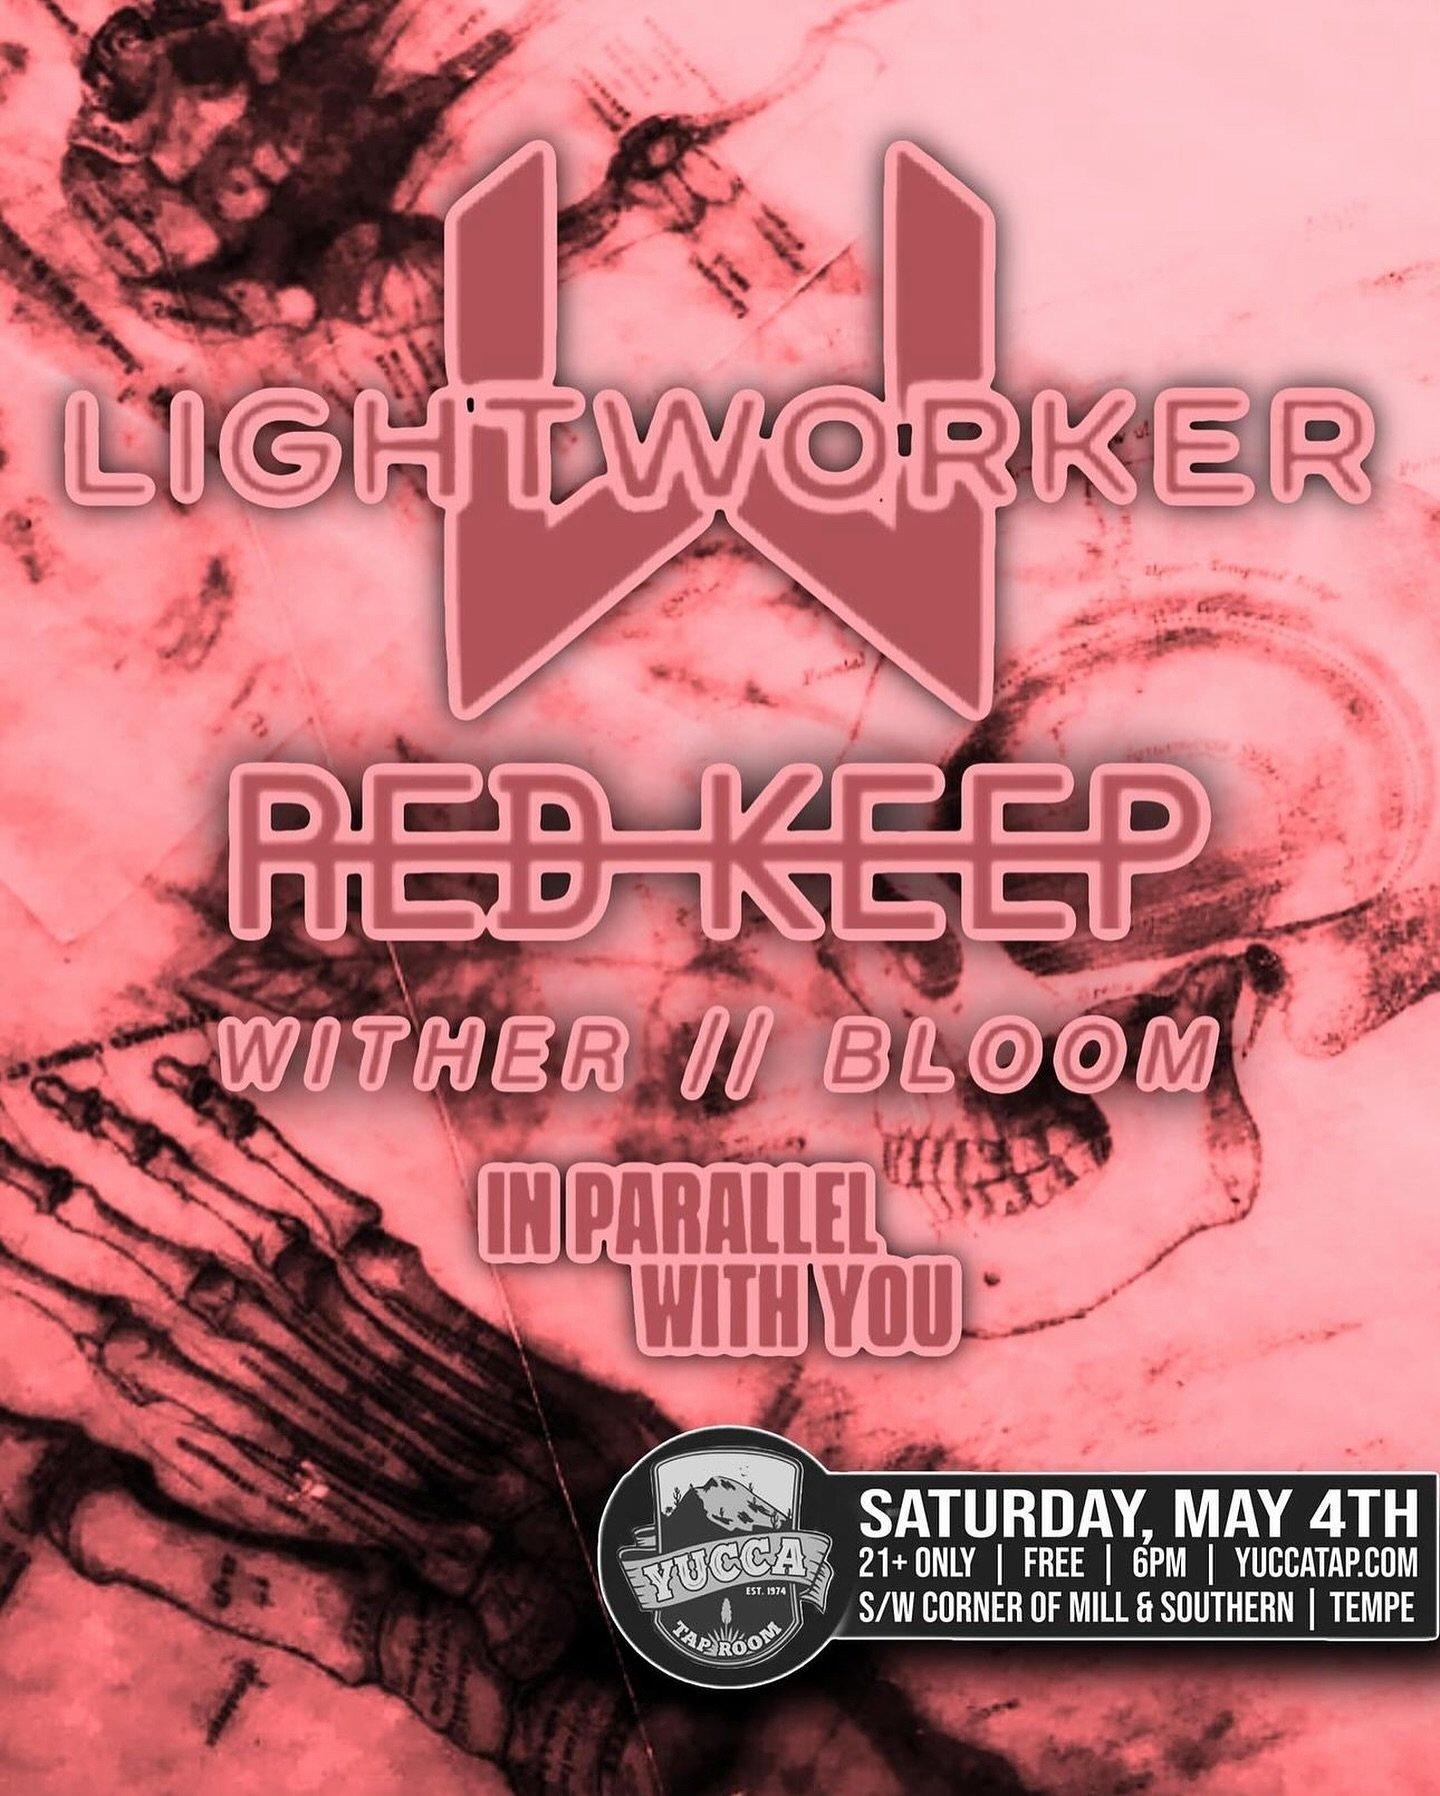 T O N I G H T!

We hit up Tempe w/ @redkeepofficial and are joined by @wearewitherbloom and @inparallelwithyou at the @yuccataproom. See you soon!